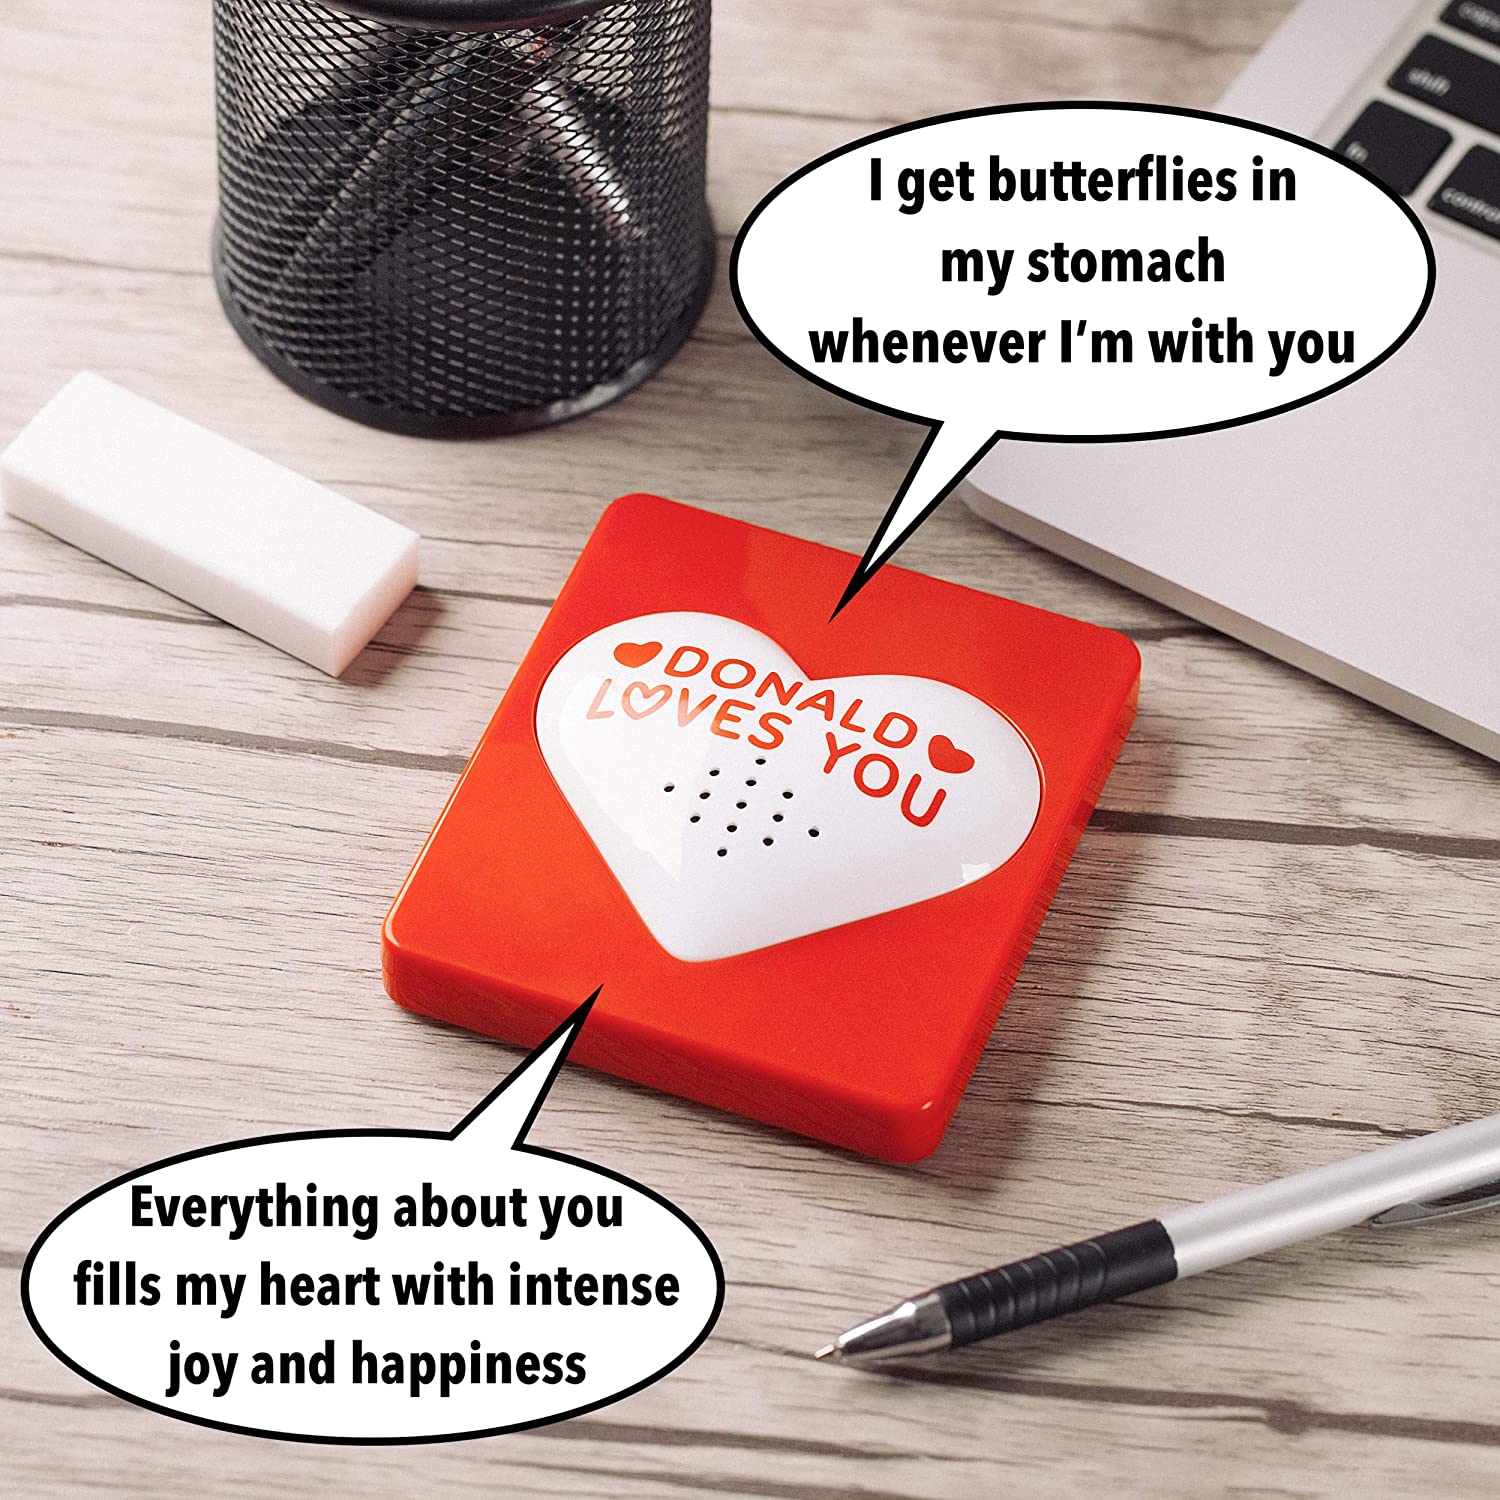 Donald Trump Talking Love Button - Says 15 Different Funny Love Quotes in His Voice - Hilarious Romantic Gag Gifts for Men or Women - Novelty Merchandise - Batteries Are Included Inside